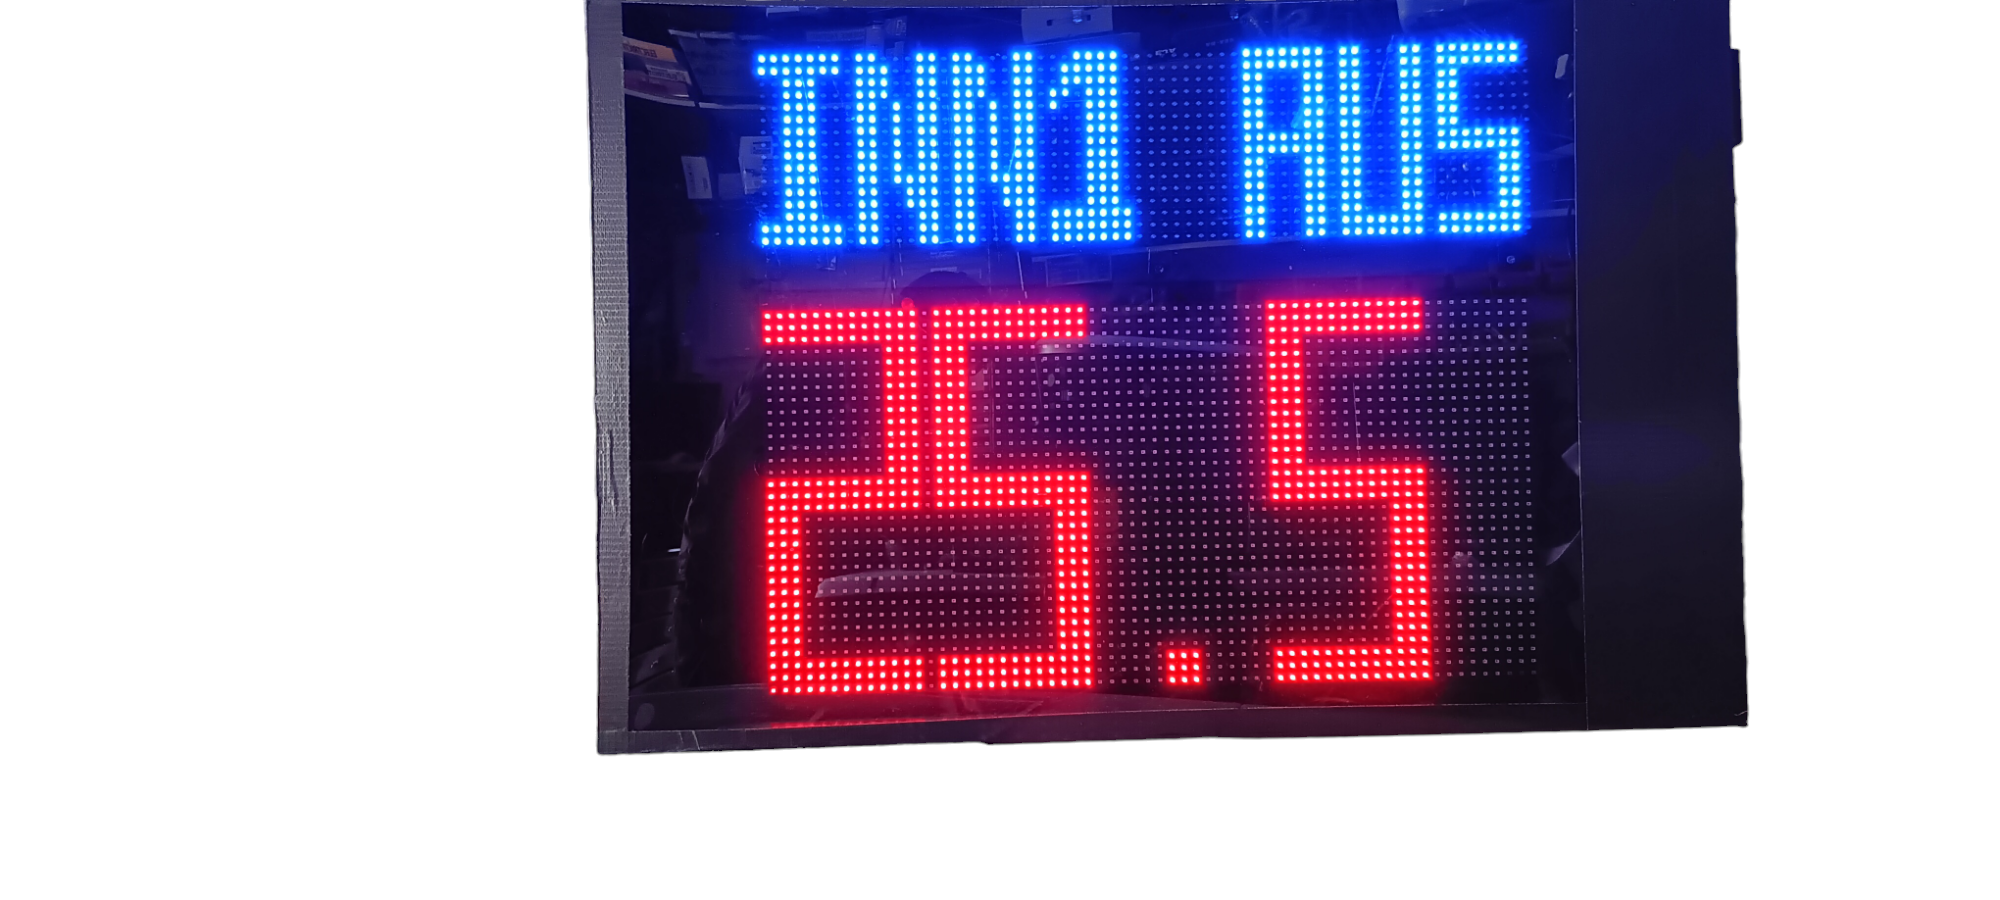 How to assemble 2 colors 6 x dot matrix displays to build cricket and soccer scoreboard